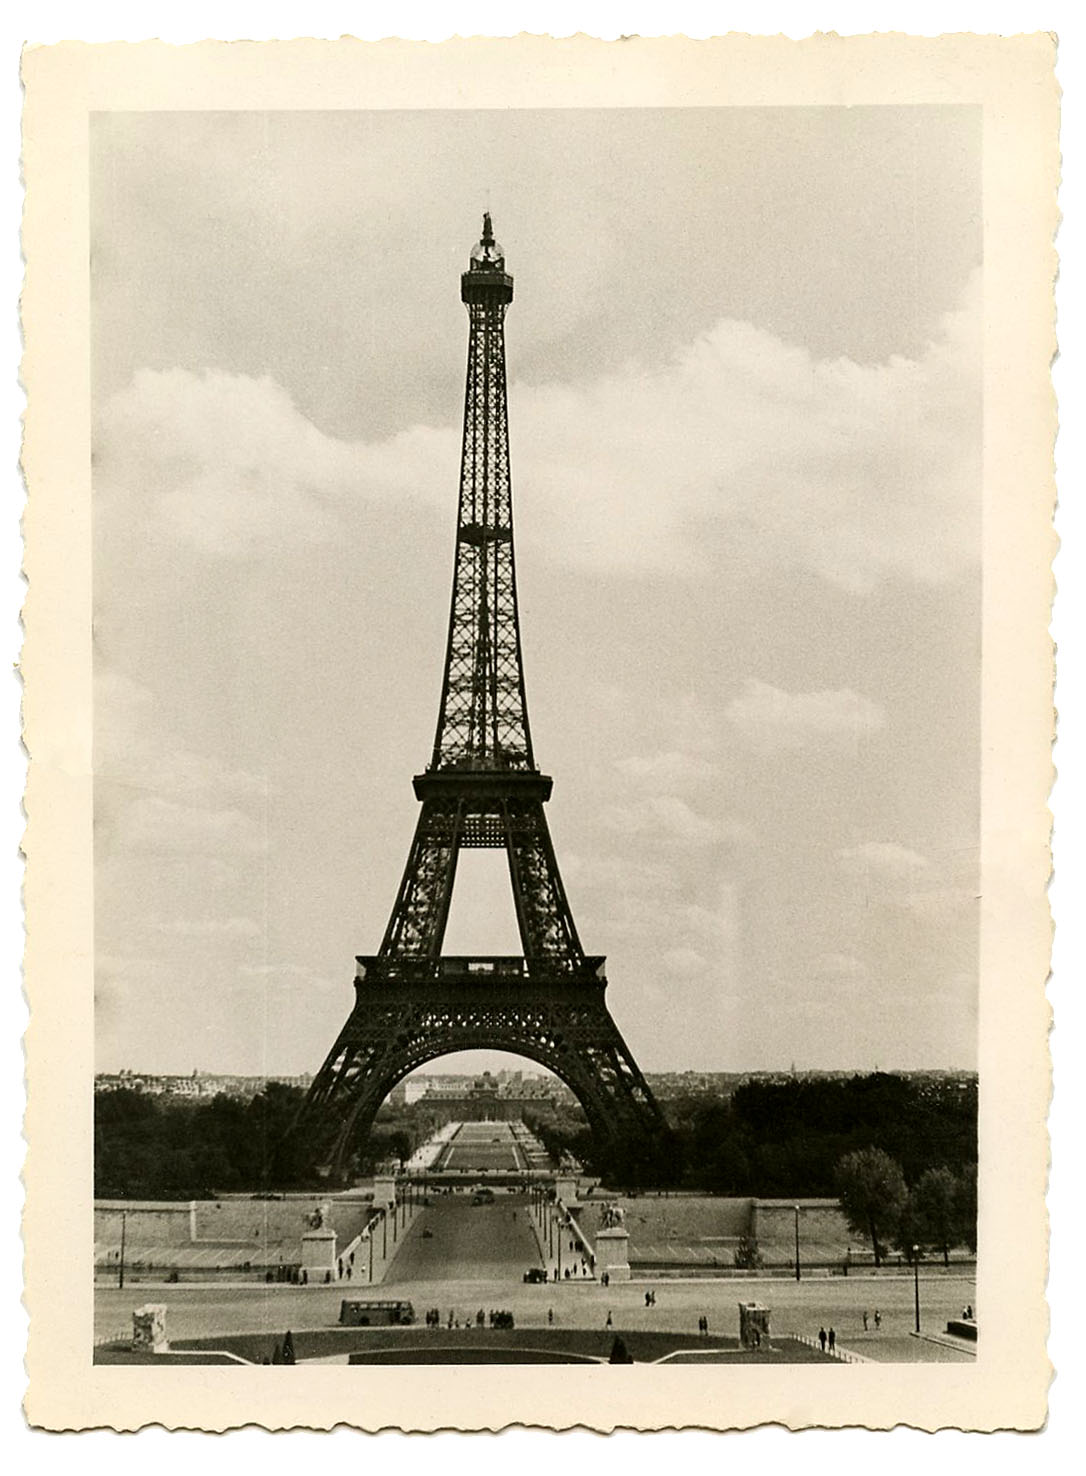 Vintage Image - Eiffel Tower - Old Photo - The Graphics Fairy